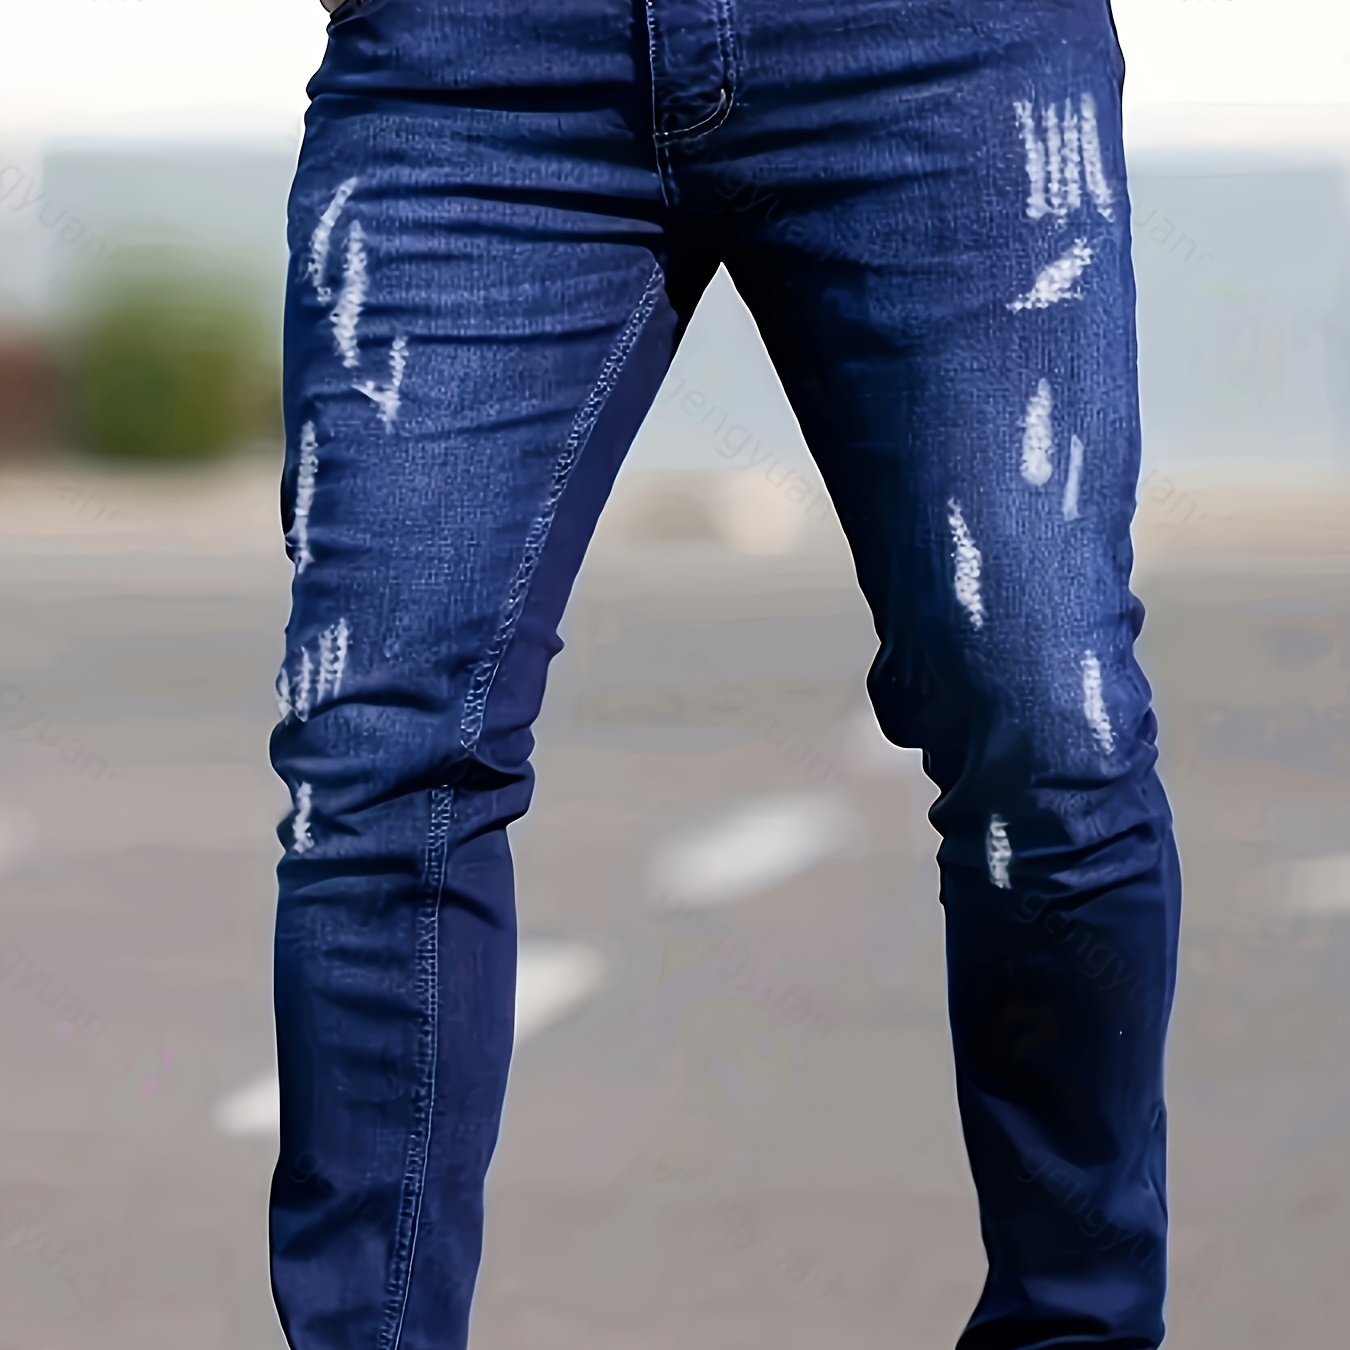 

Men's Ripped Denim Trousers With Pockets, Causal Skinny Cotton Blend Jeans For Outdoor Activities